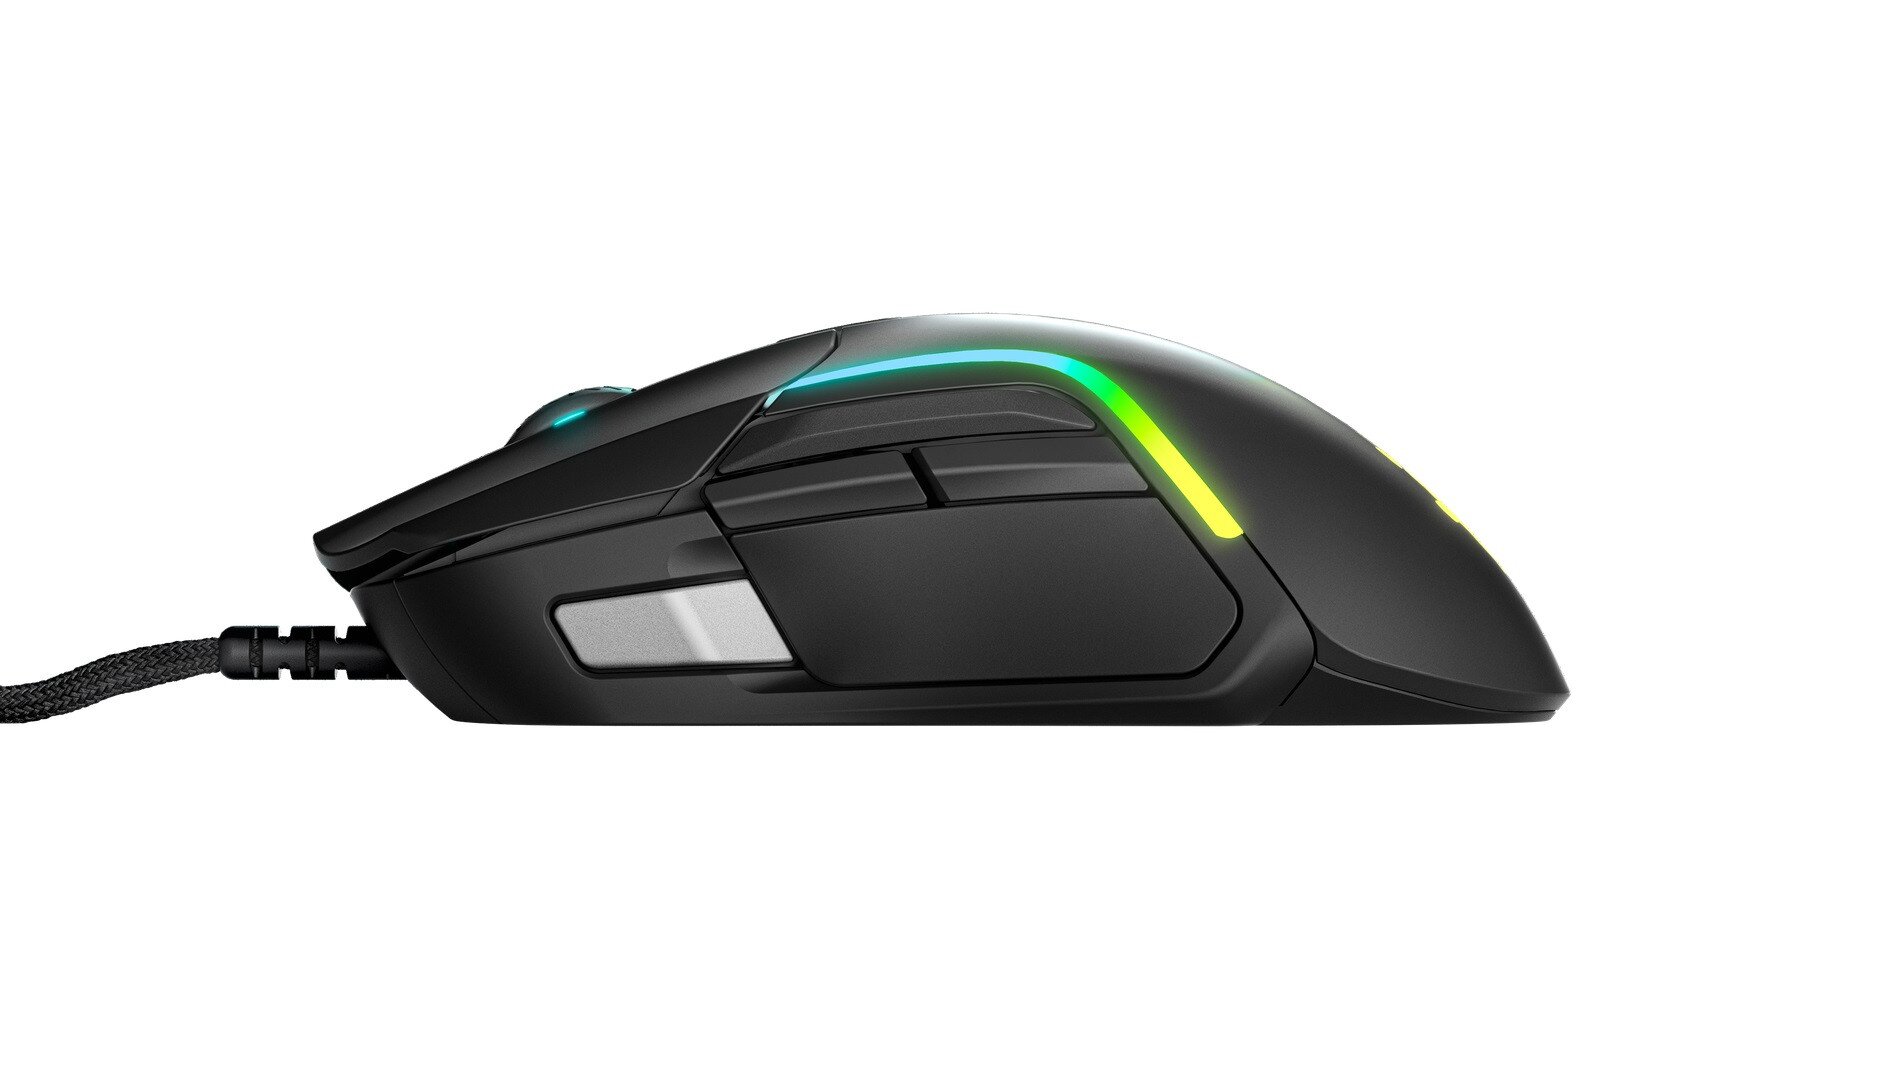 Buy SteelSeries Rival 5 Wired Optical Gaming Mouse online in Pakistan - Tejar.pk